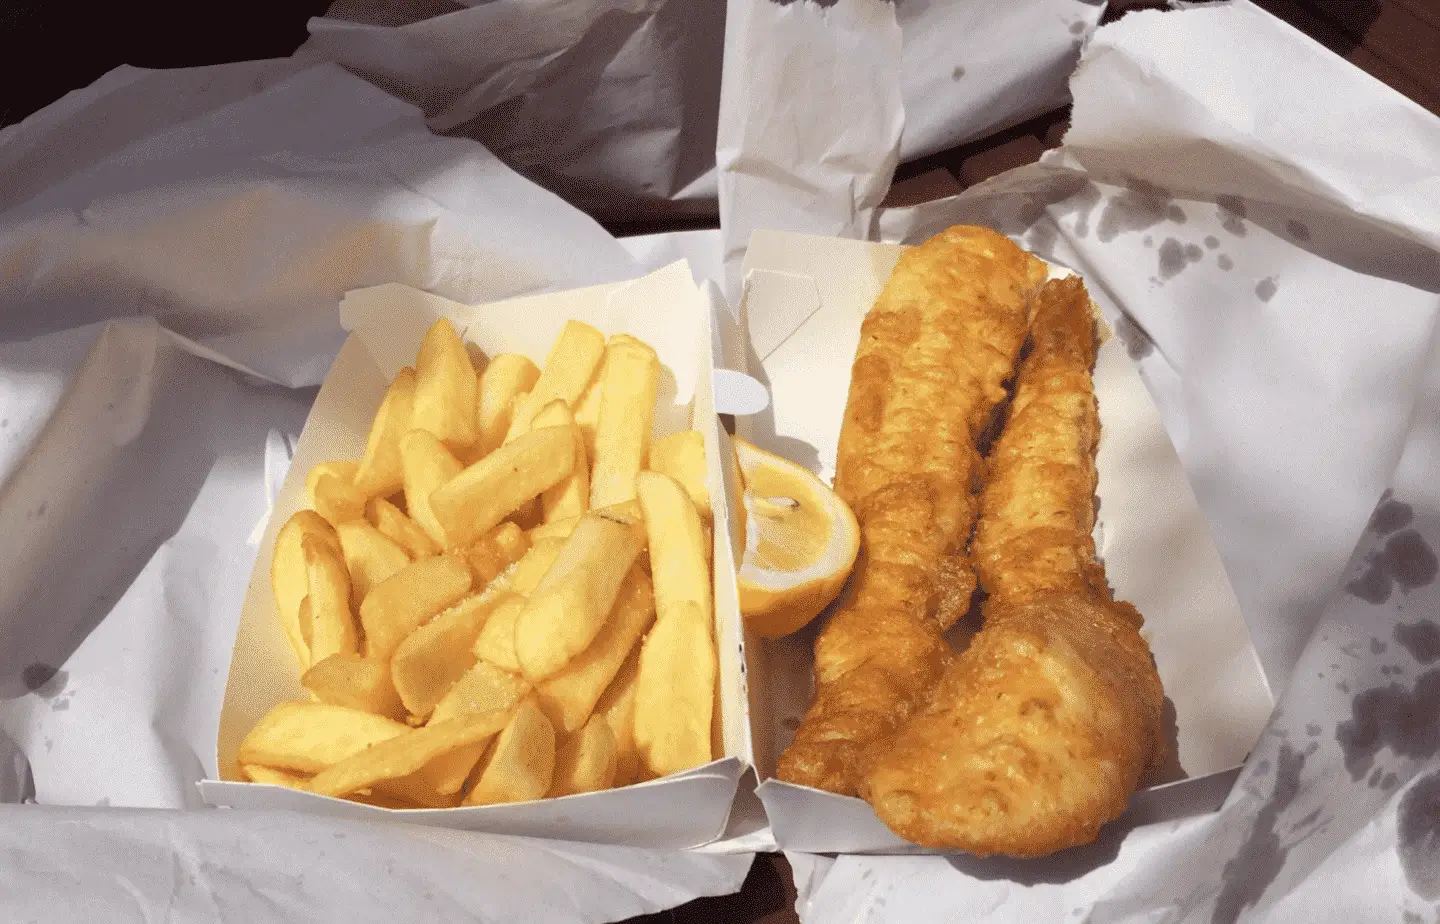 Jervis Bay Guide - World Famous Fish N Chips, Jervis Bay, NSW, Australia